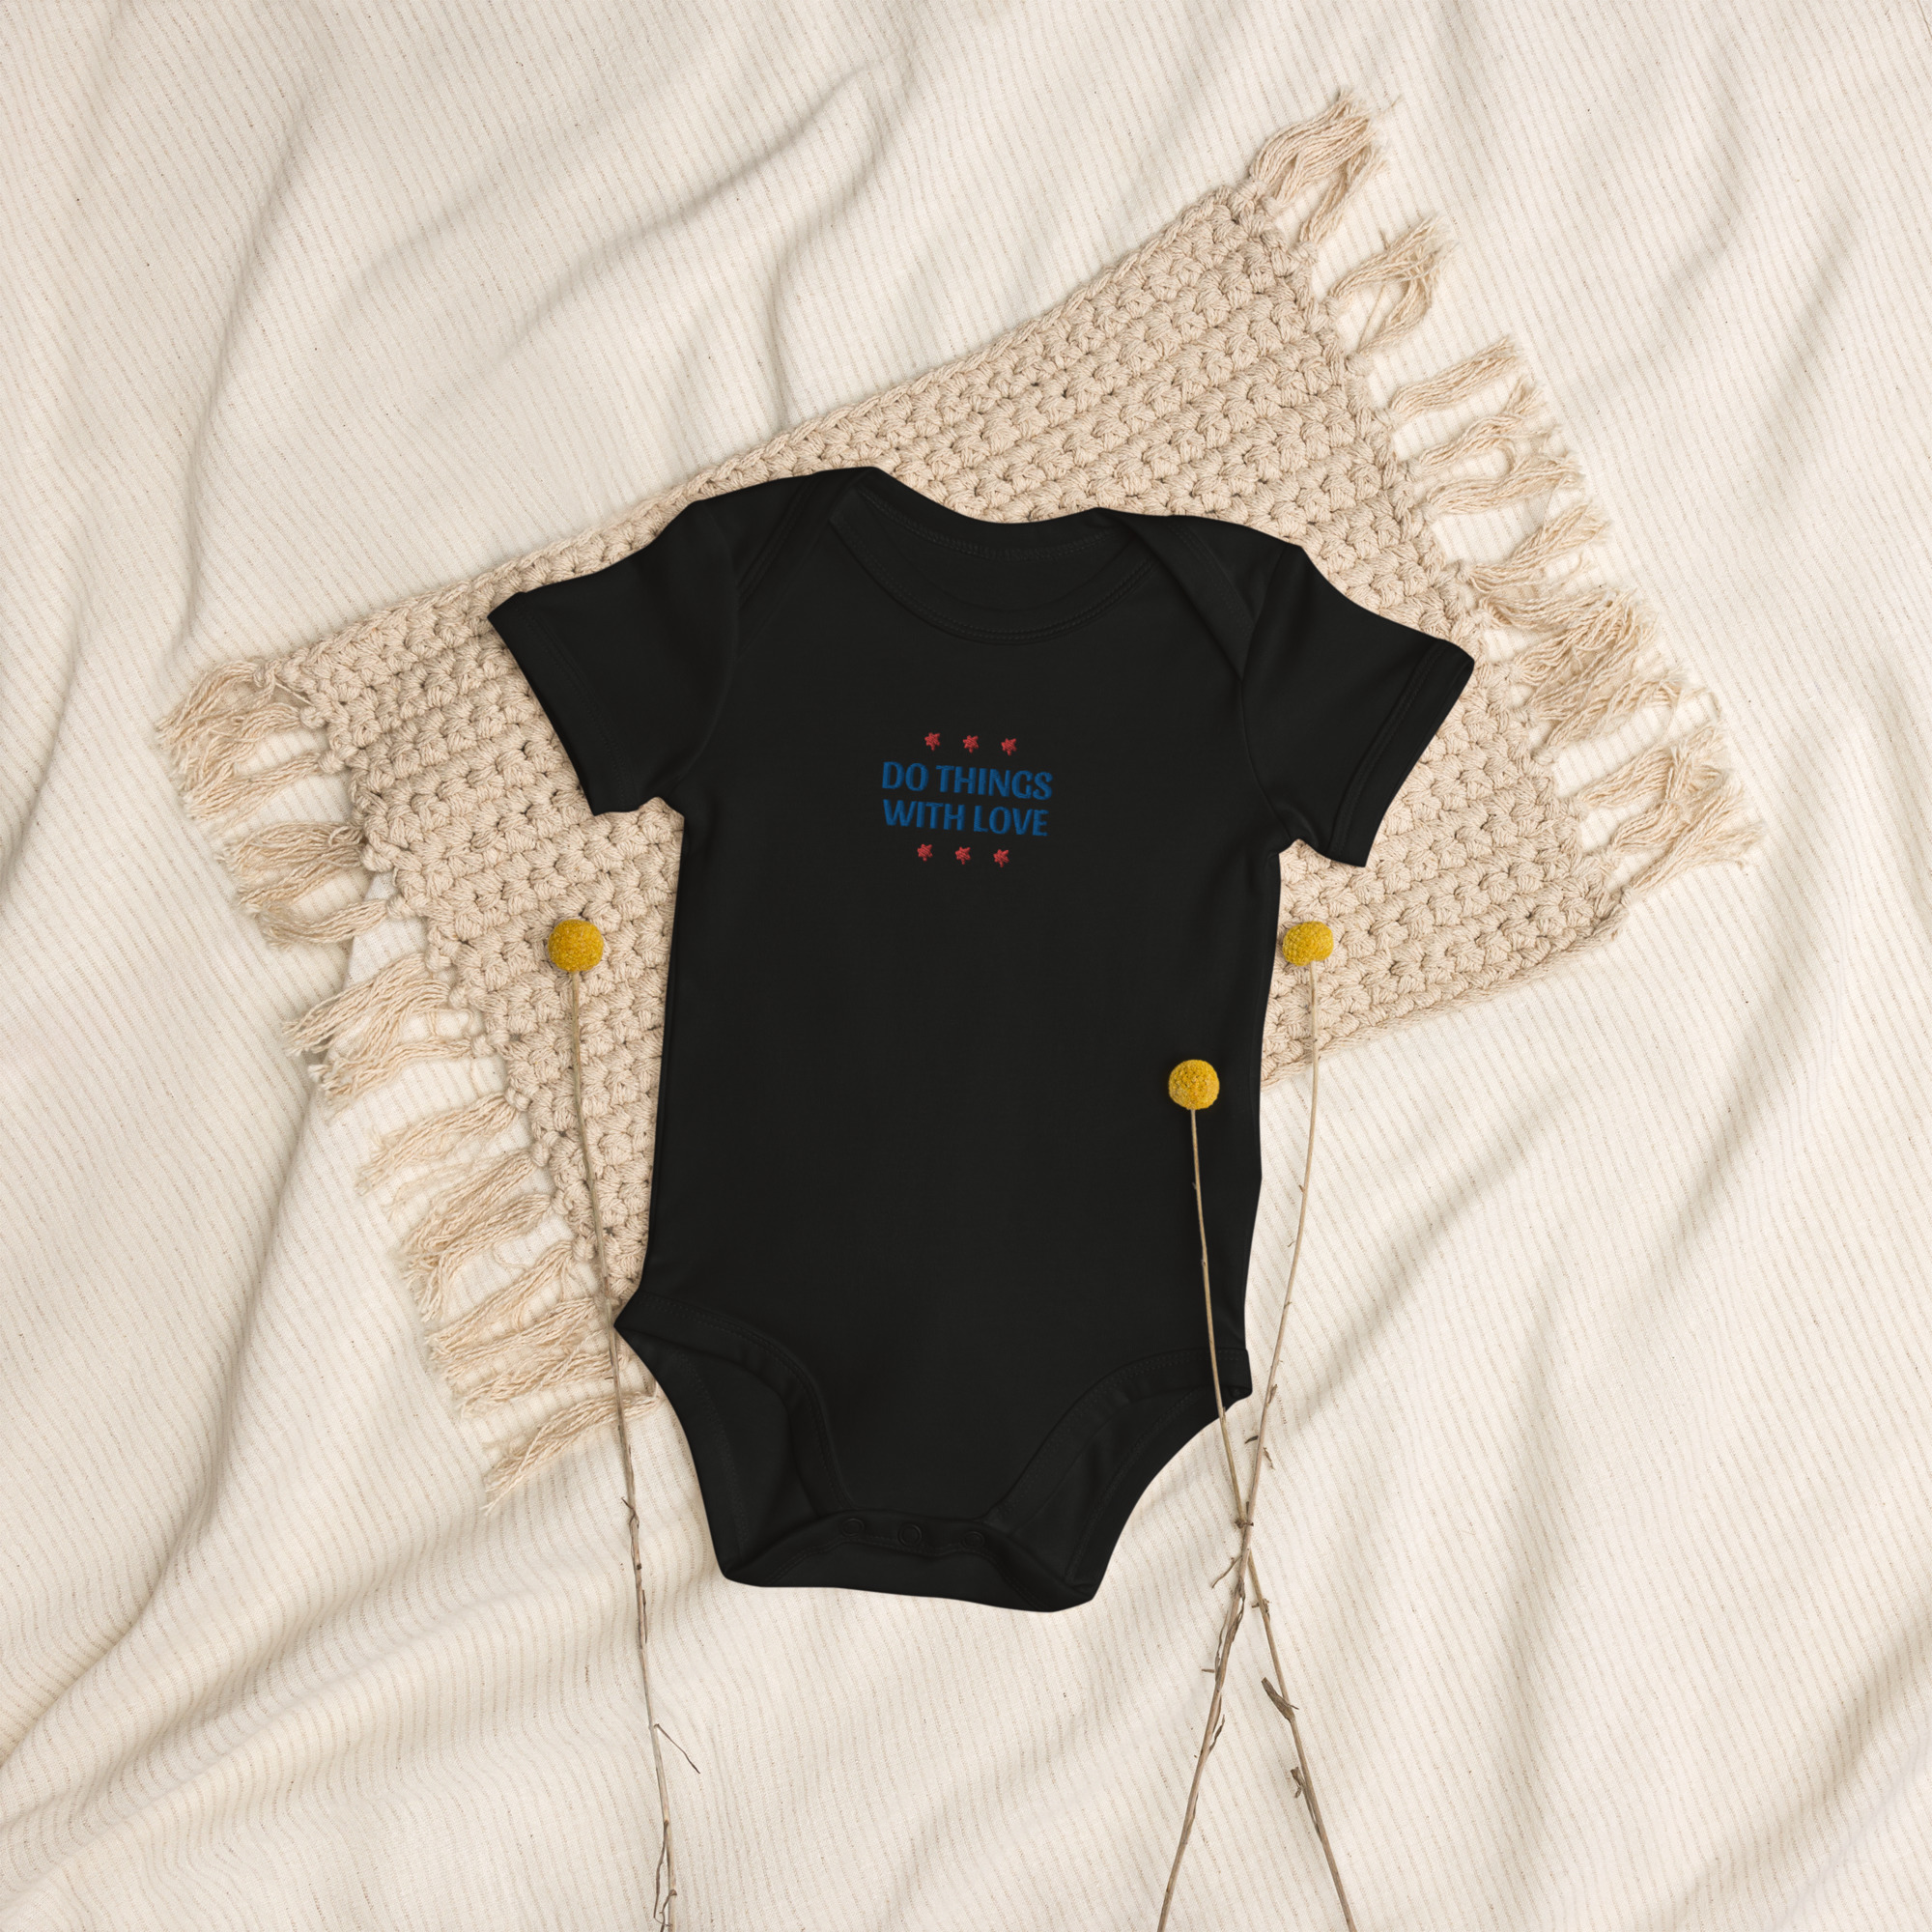 Do things with nothing Organic cotton baby bodysuit